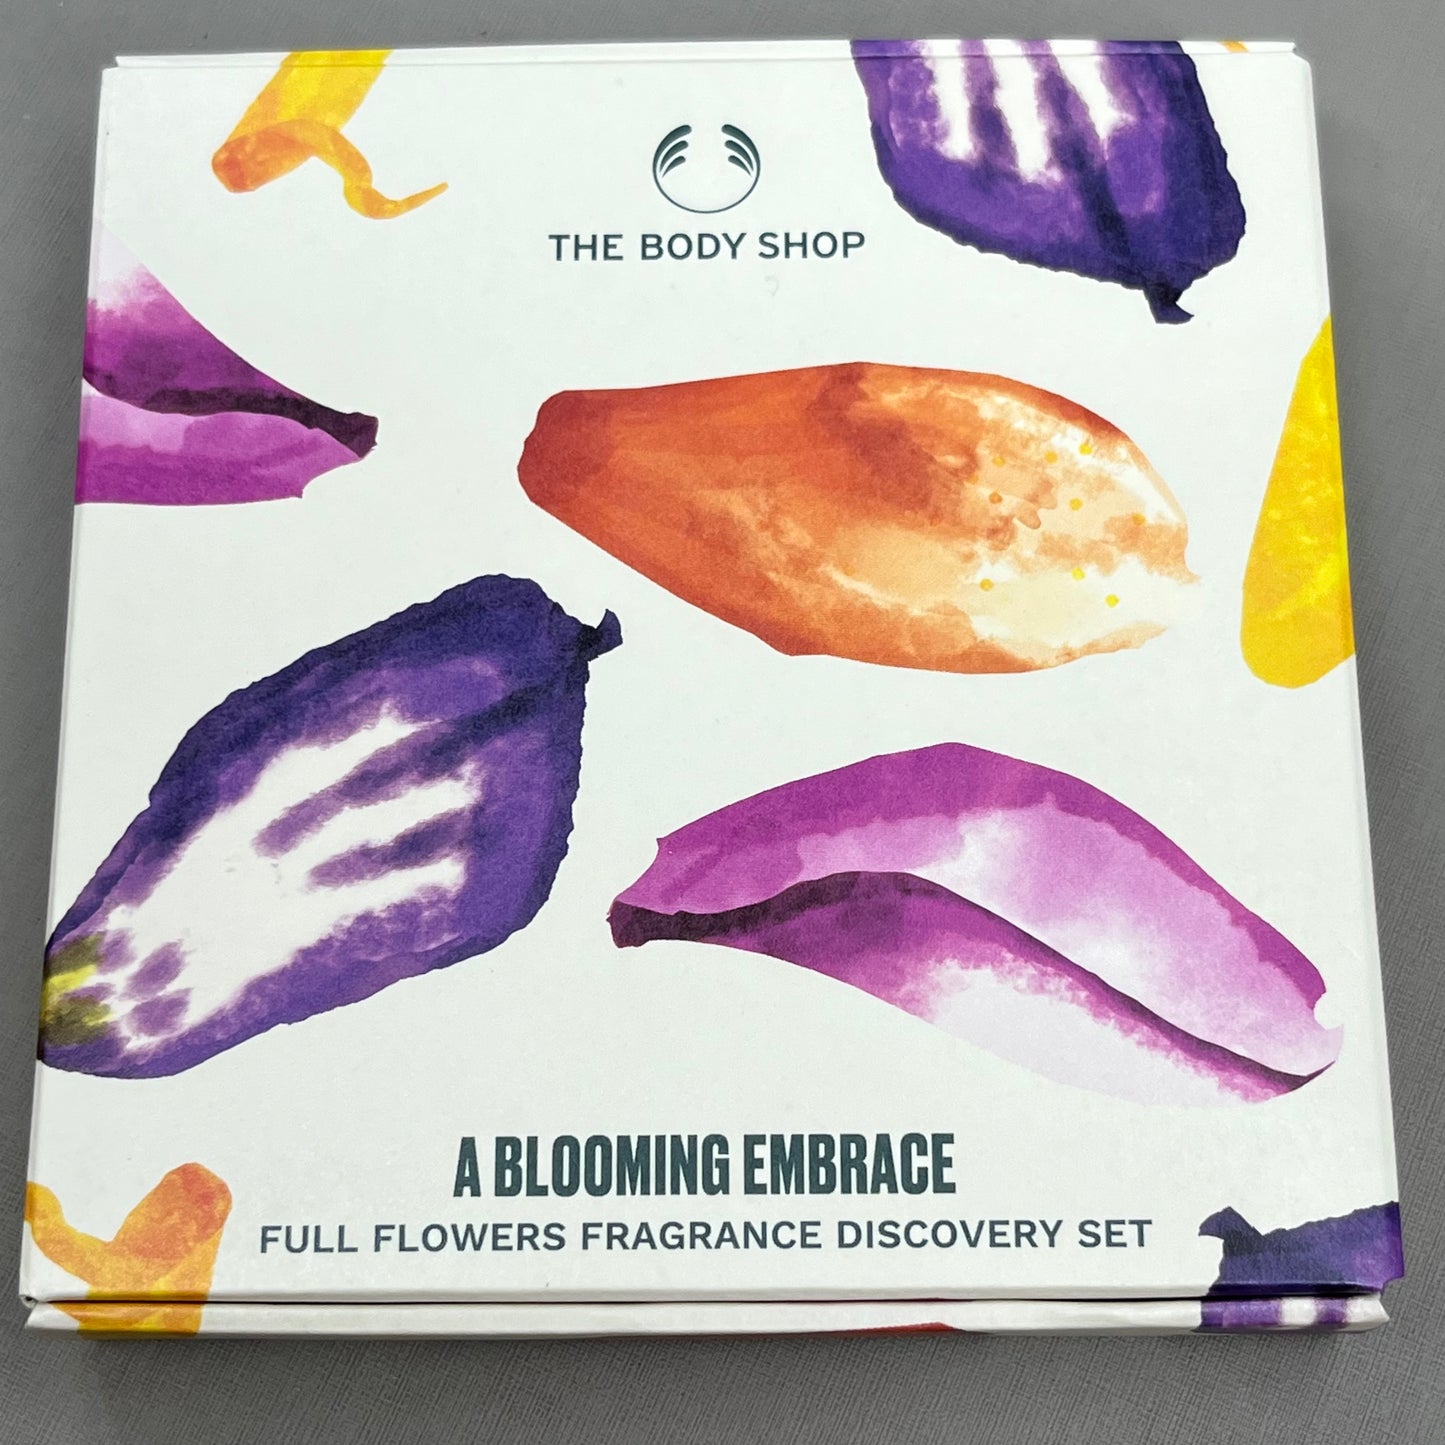 THE BODY SHOP 2 PACK!! Blooming Embrace Full Flowers Fragrance Discovery Set (New)